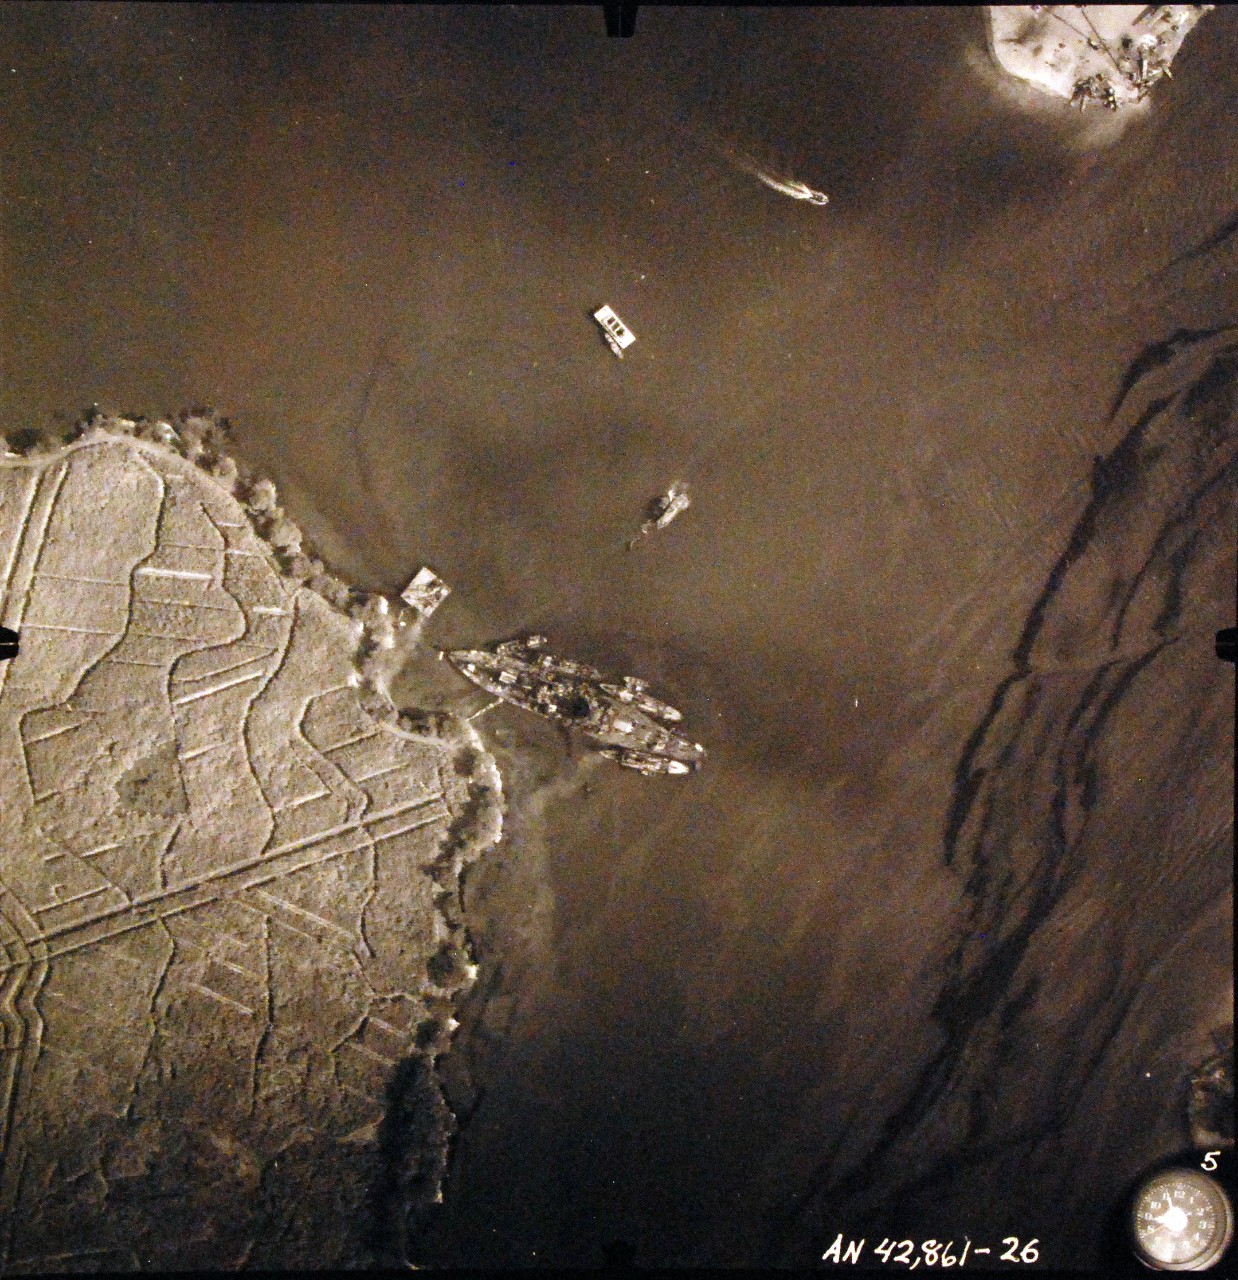 80-G-387587:  Pearl Harbor Attack, 7 December 1941.  Aerial view of "Battleship Row" moorings on the southern side of Ford Island, 10 December 1941, showing damage from the Japanese raid three days earlier.  USS Nevada (BB 36) is shown off Waipaio Point. Photographed by VJ-1 at an altitude of 3,000 feet and released November 9, 1950. U.S. Navy photograph, now in the collections of the National Archives.      (9/22/2015).